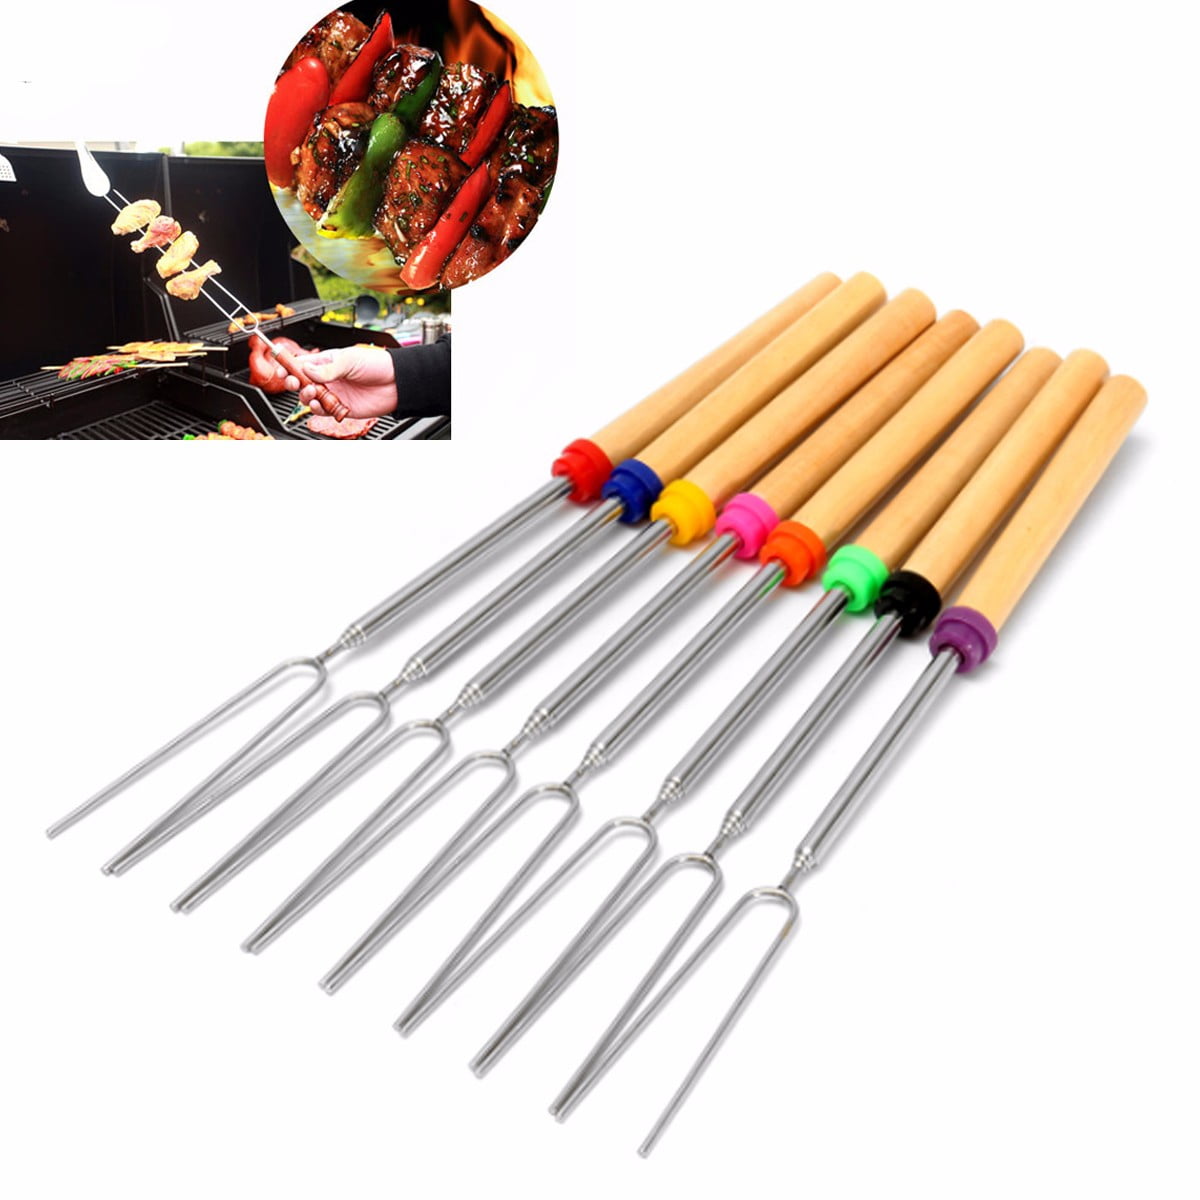 Colin Spencerr 32 Inch Marshmallow Roasting Sticks Extendable Forks Set of 6 Telescoping Smores Skewers for Smores for Campfire Firepit and Sausage BBQ